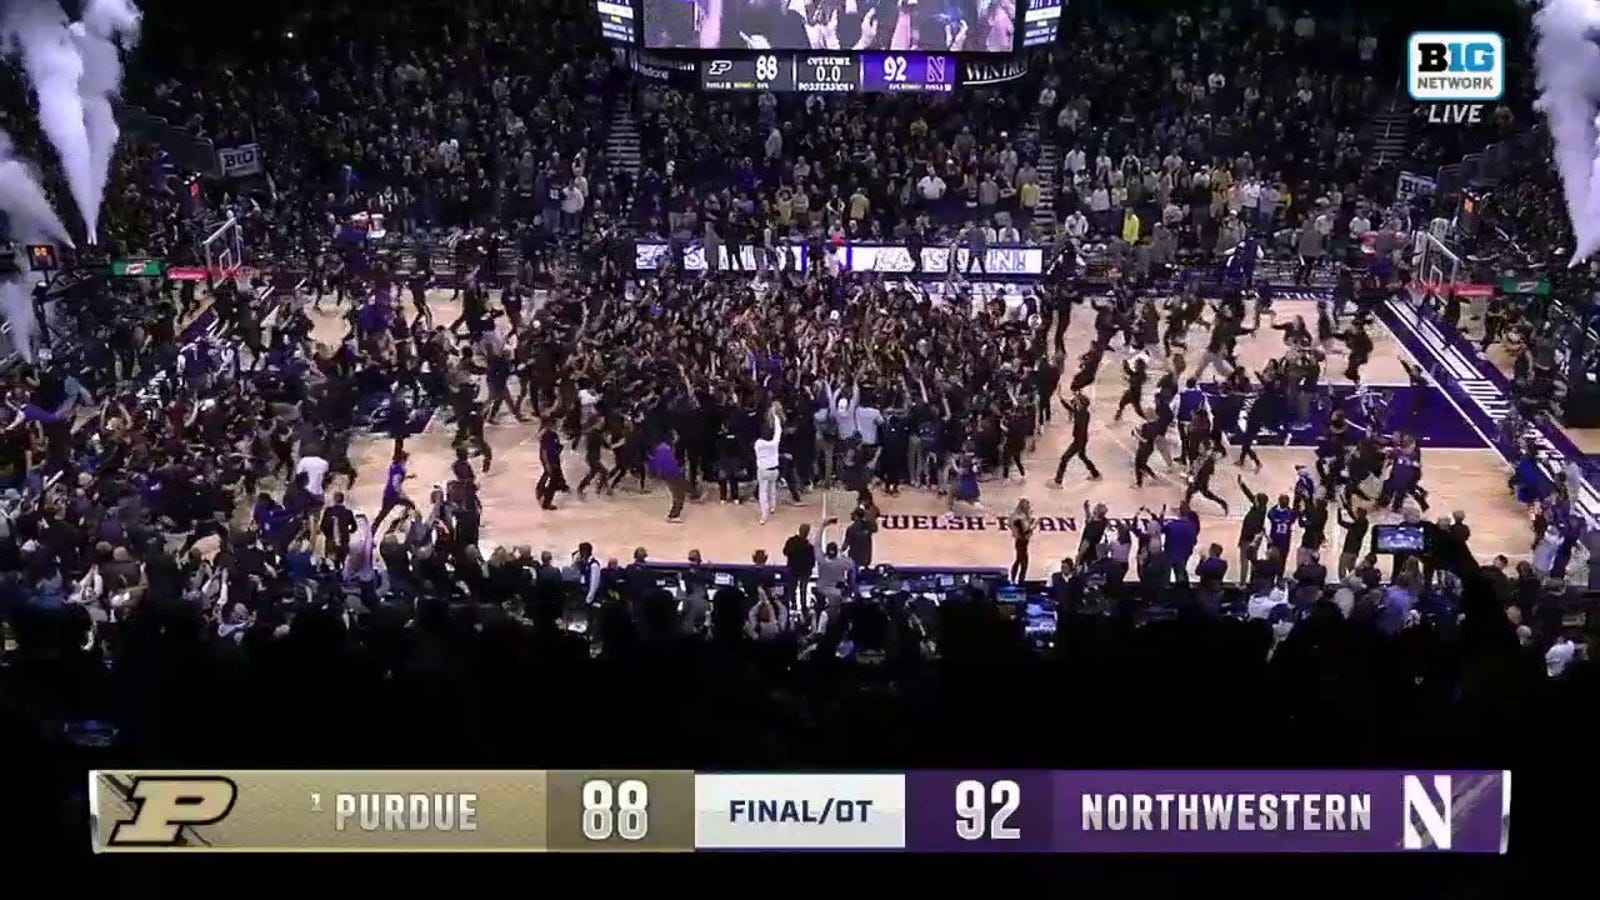 Blake Preston comes away with a crucial steal as Northwestern upsets No. 1 Purdue. 92-88